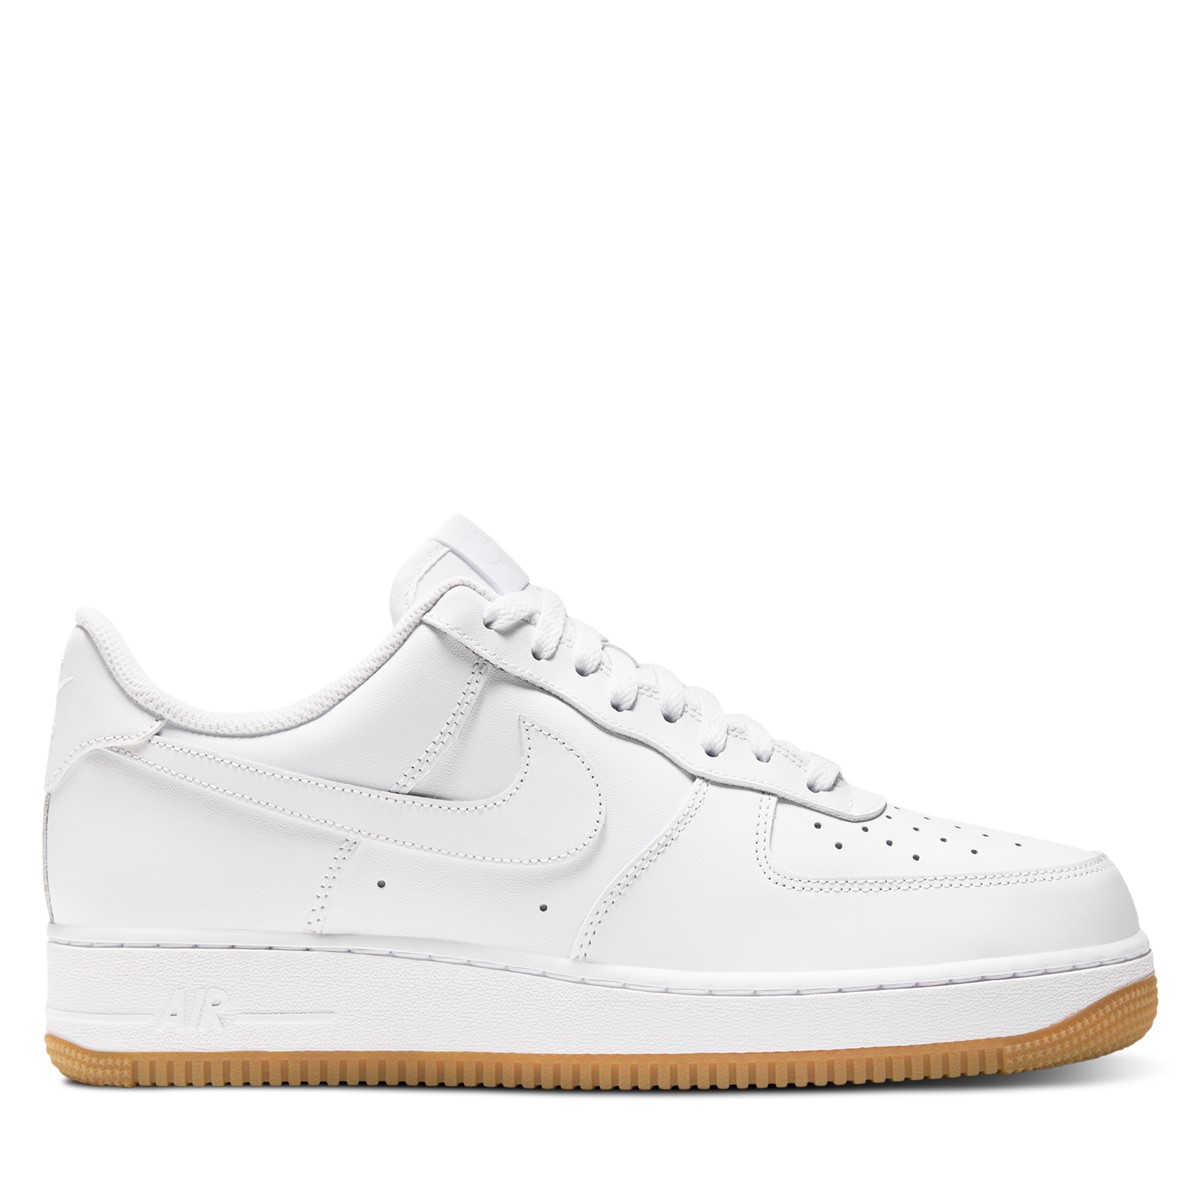 Nike Air Force 1 07 Sneaker Low White Black Discount Offers, Save 60% ...